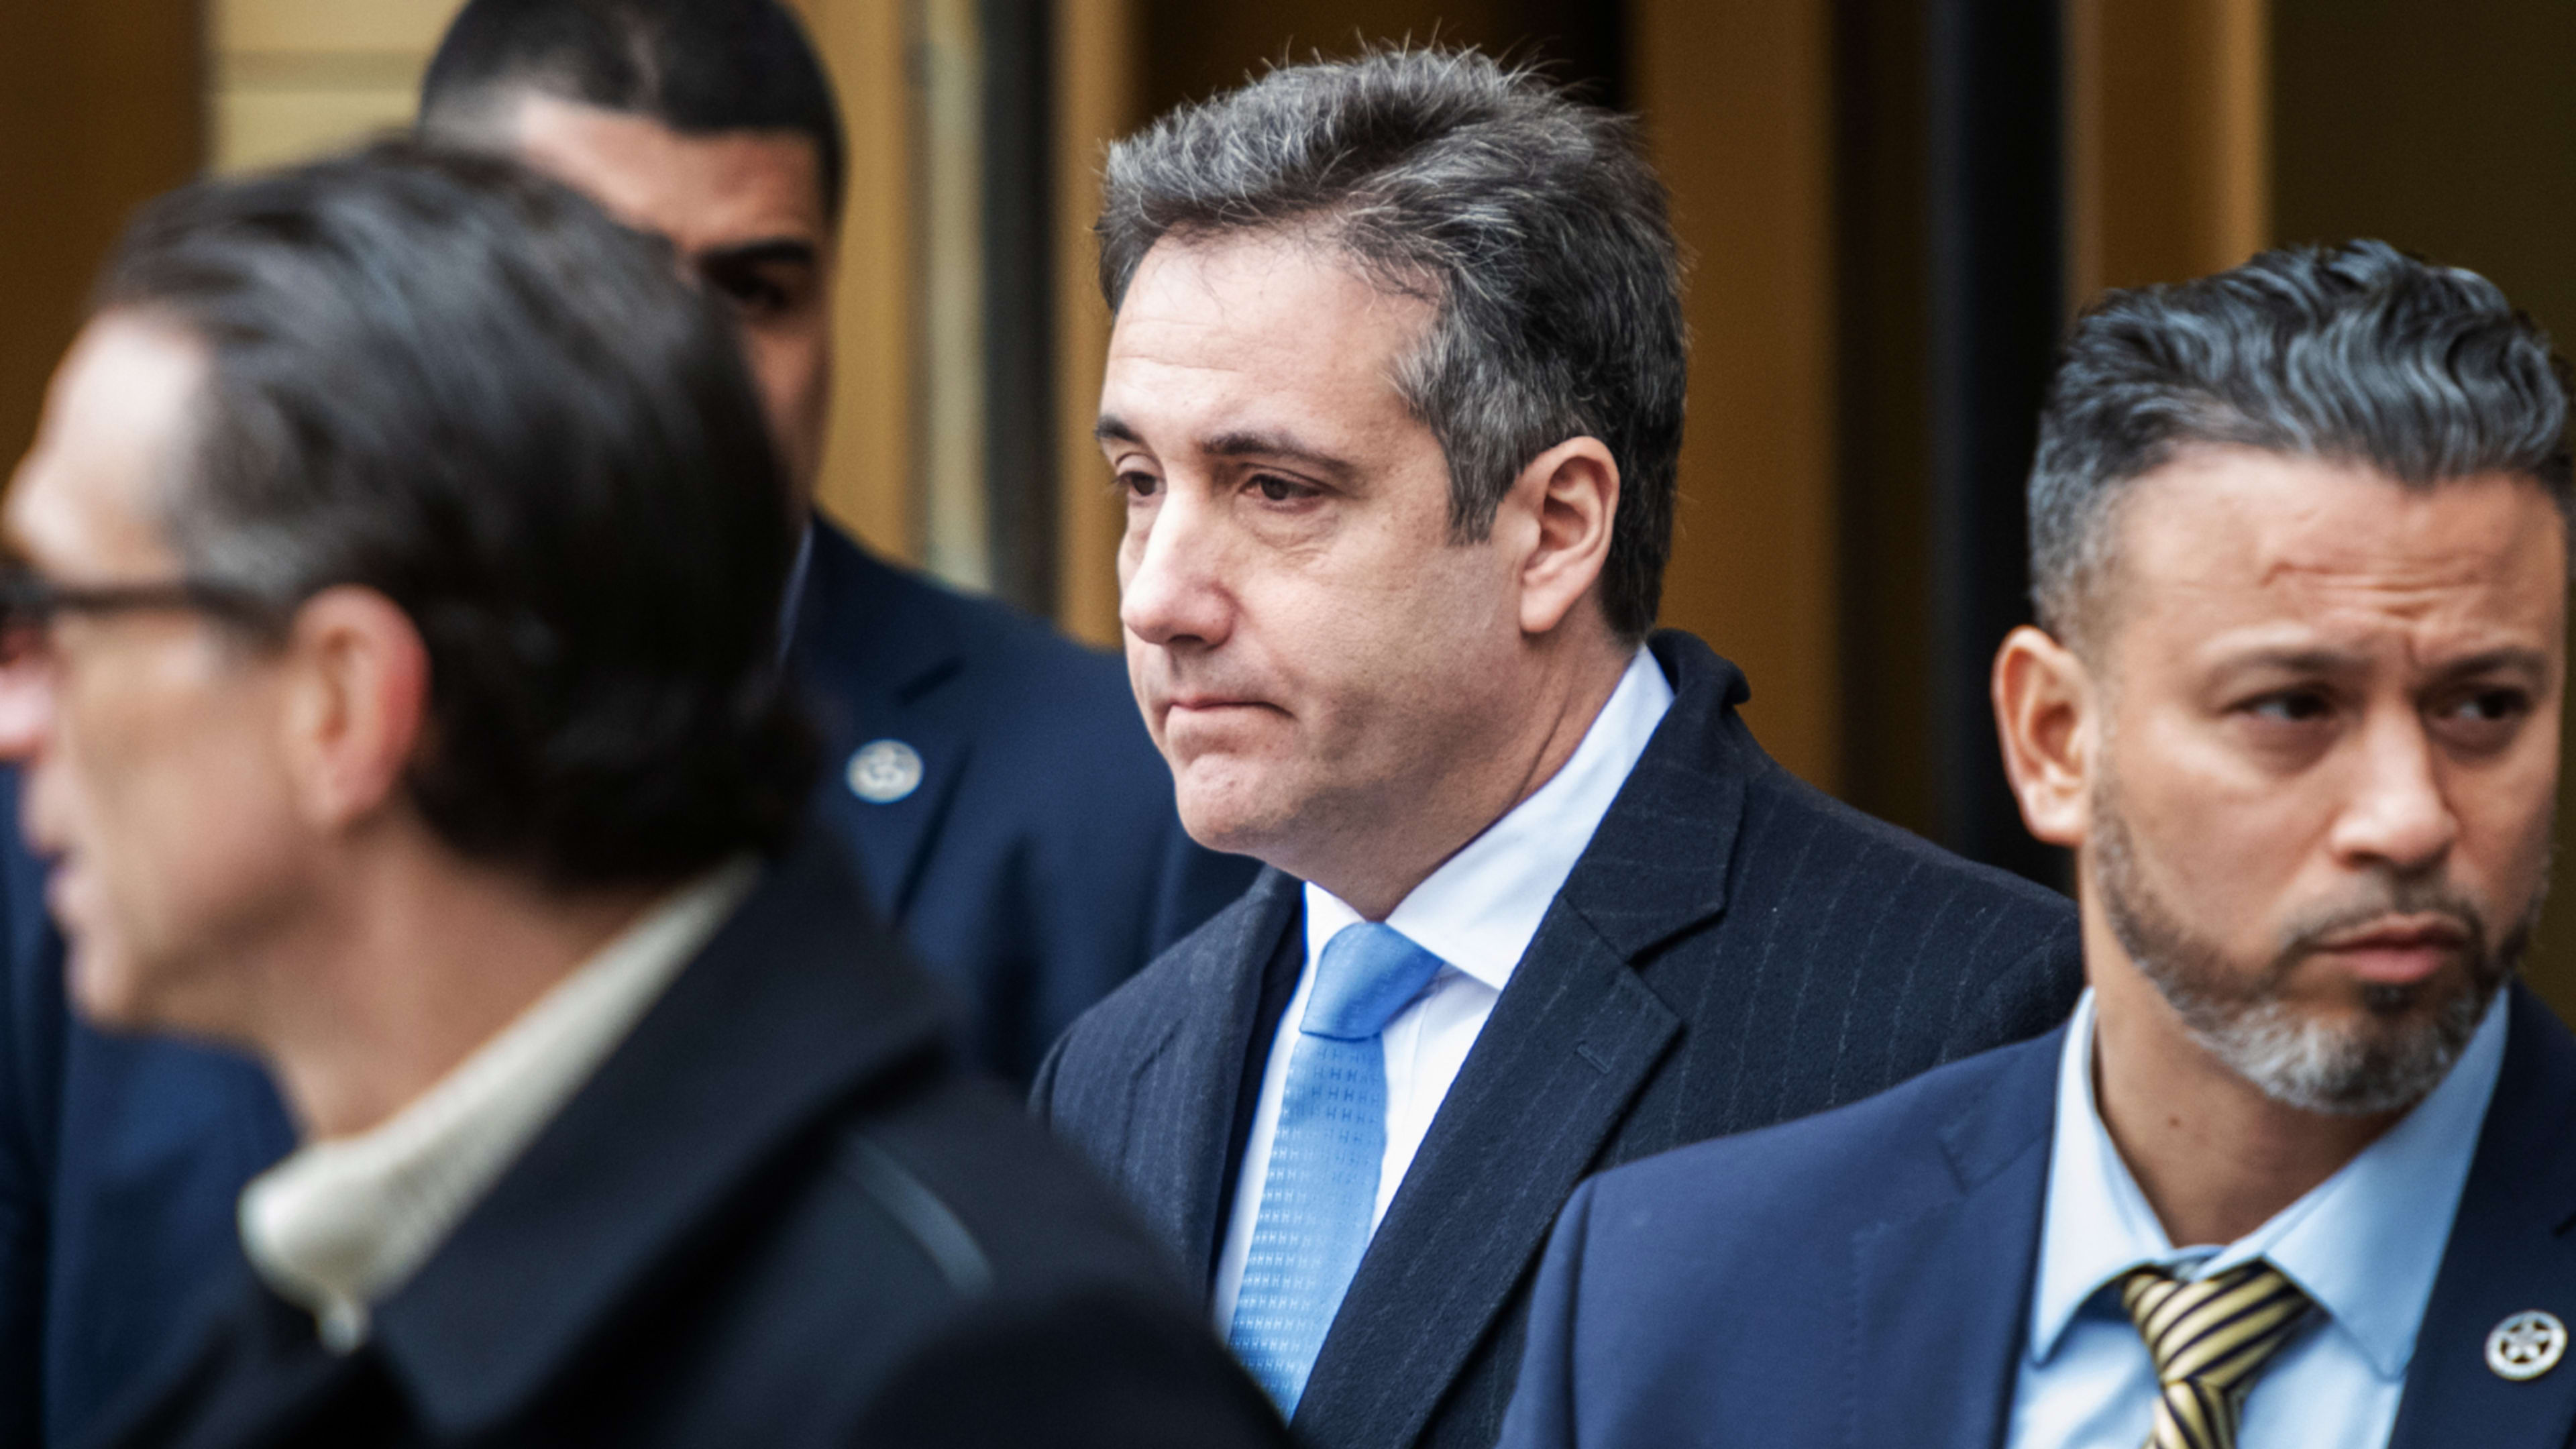 Michael Cohen gets 3-year jail sentence for “veritable smorgasbord of fraudulent conduct”